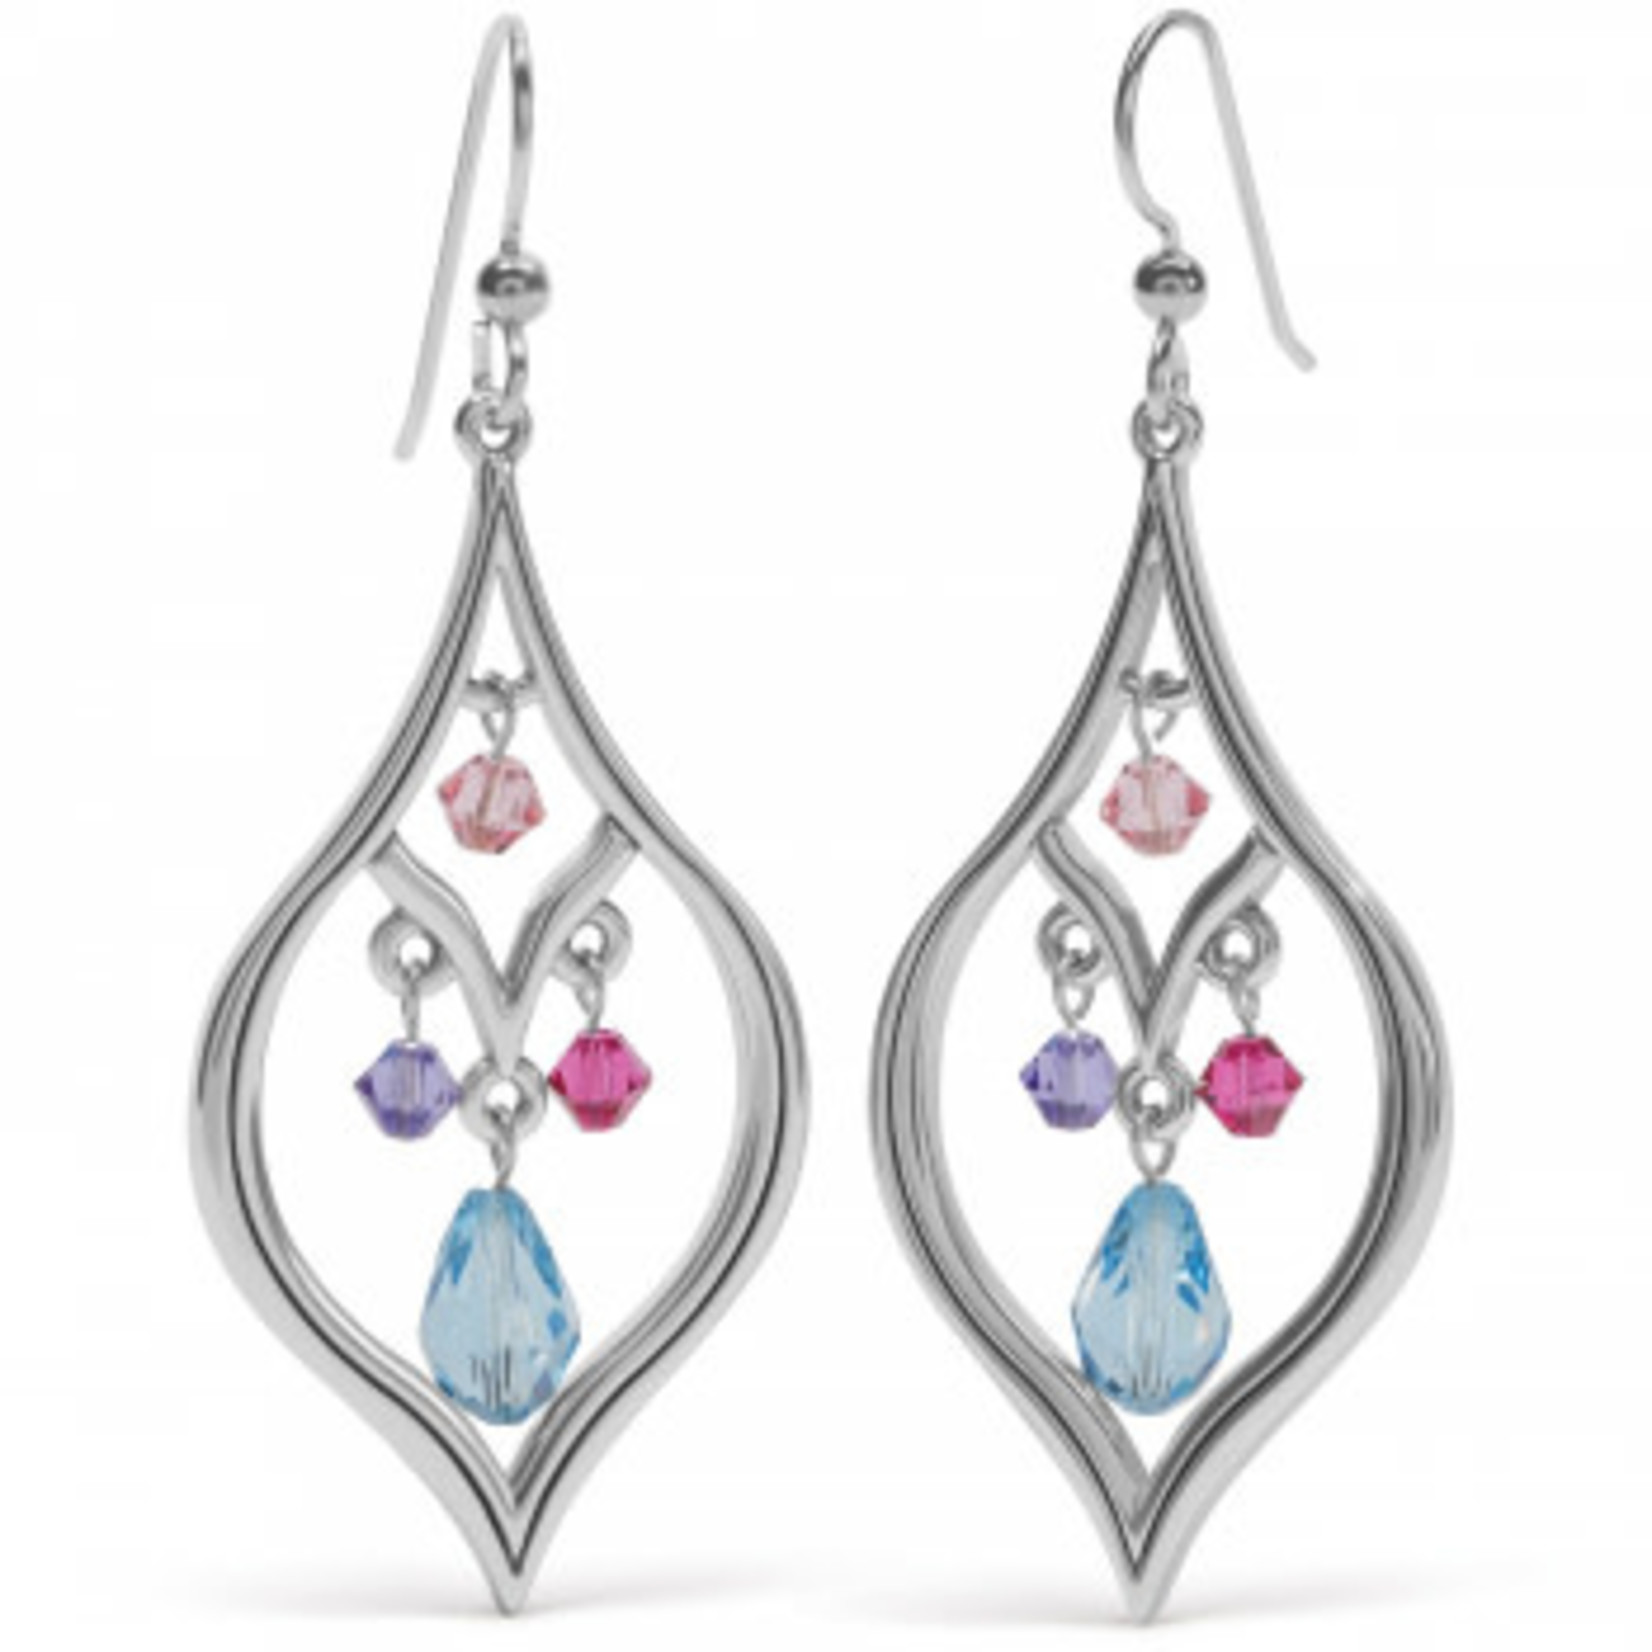 Brighton Prism Lights Drops French Wire Earrings